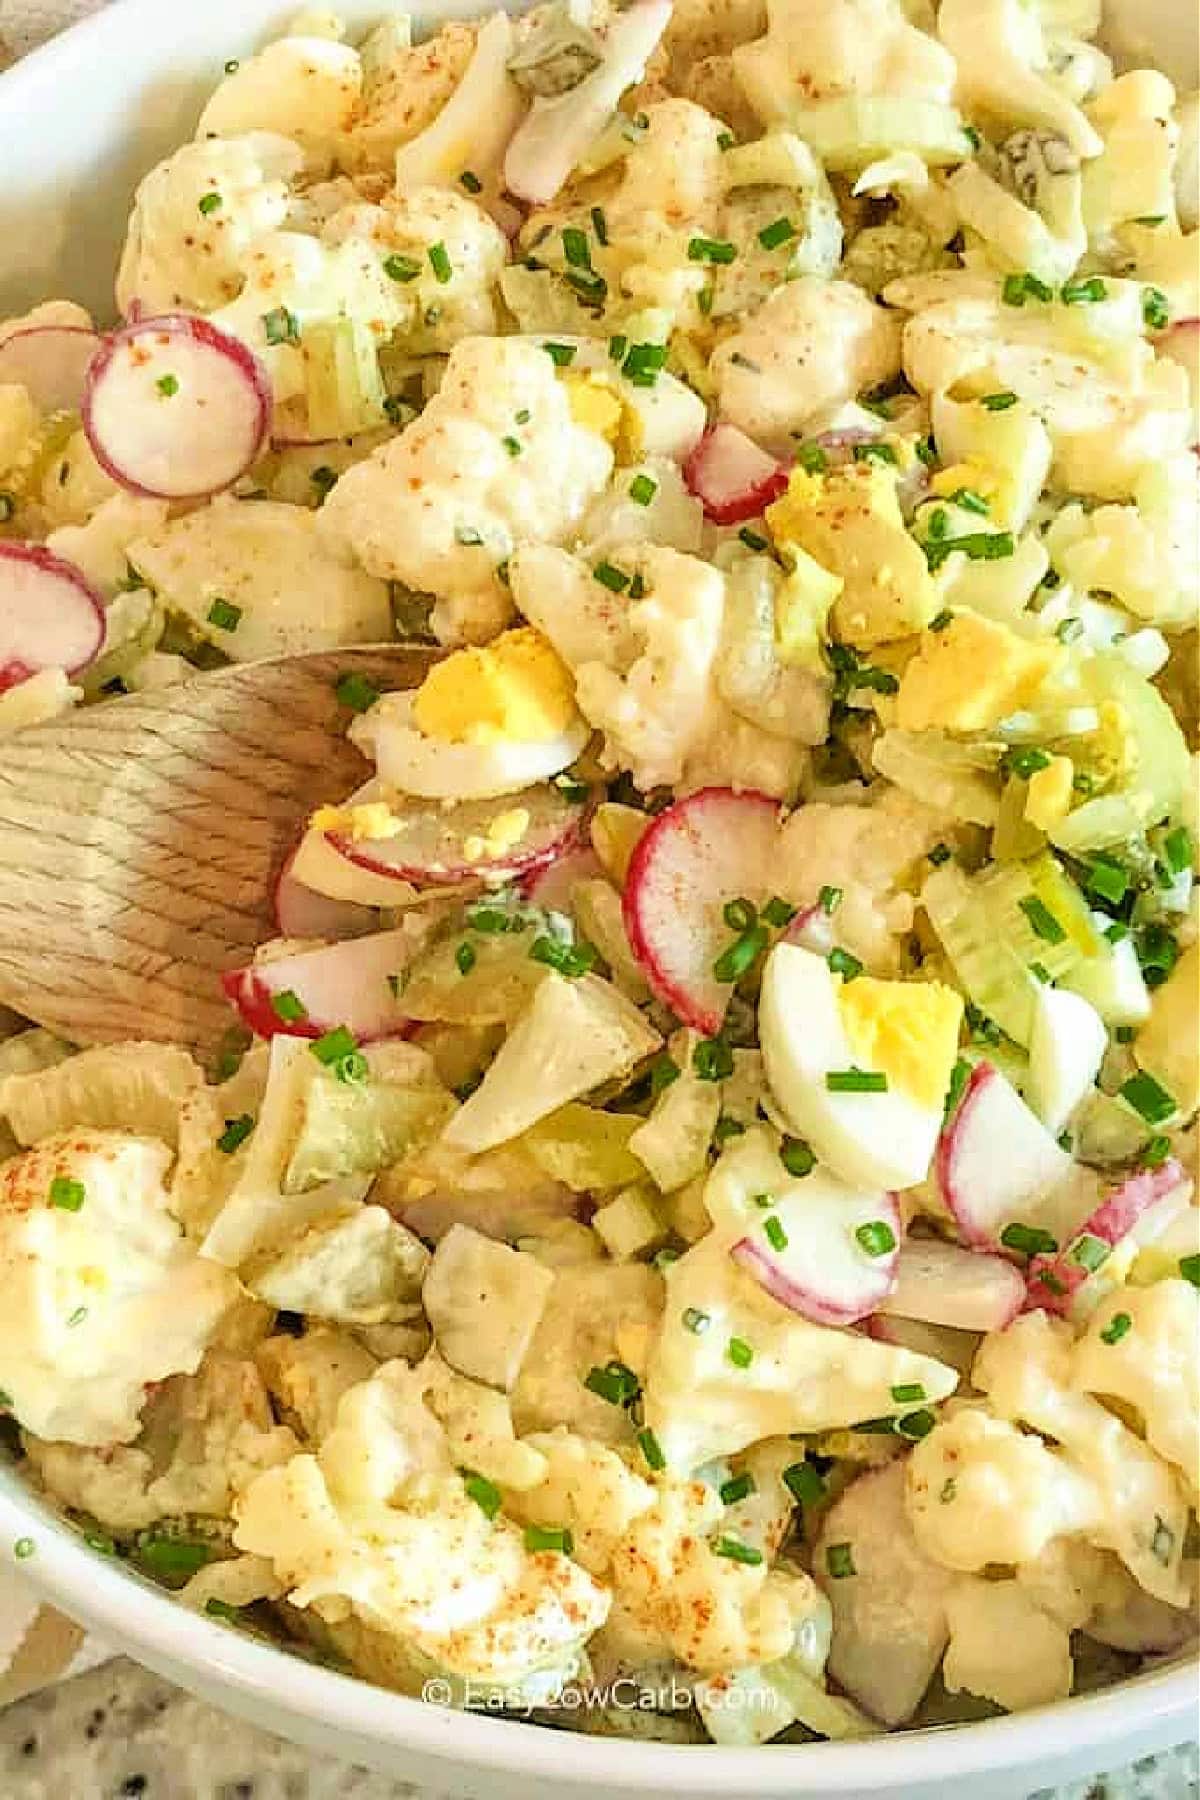 Cauliflower potato salad in a white bowl with a wooden spoon